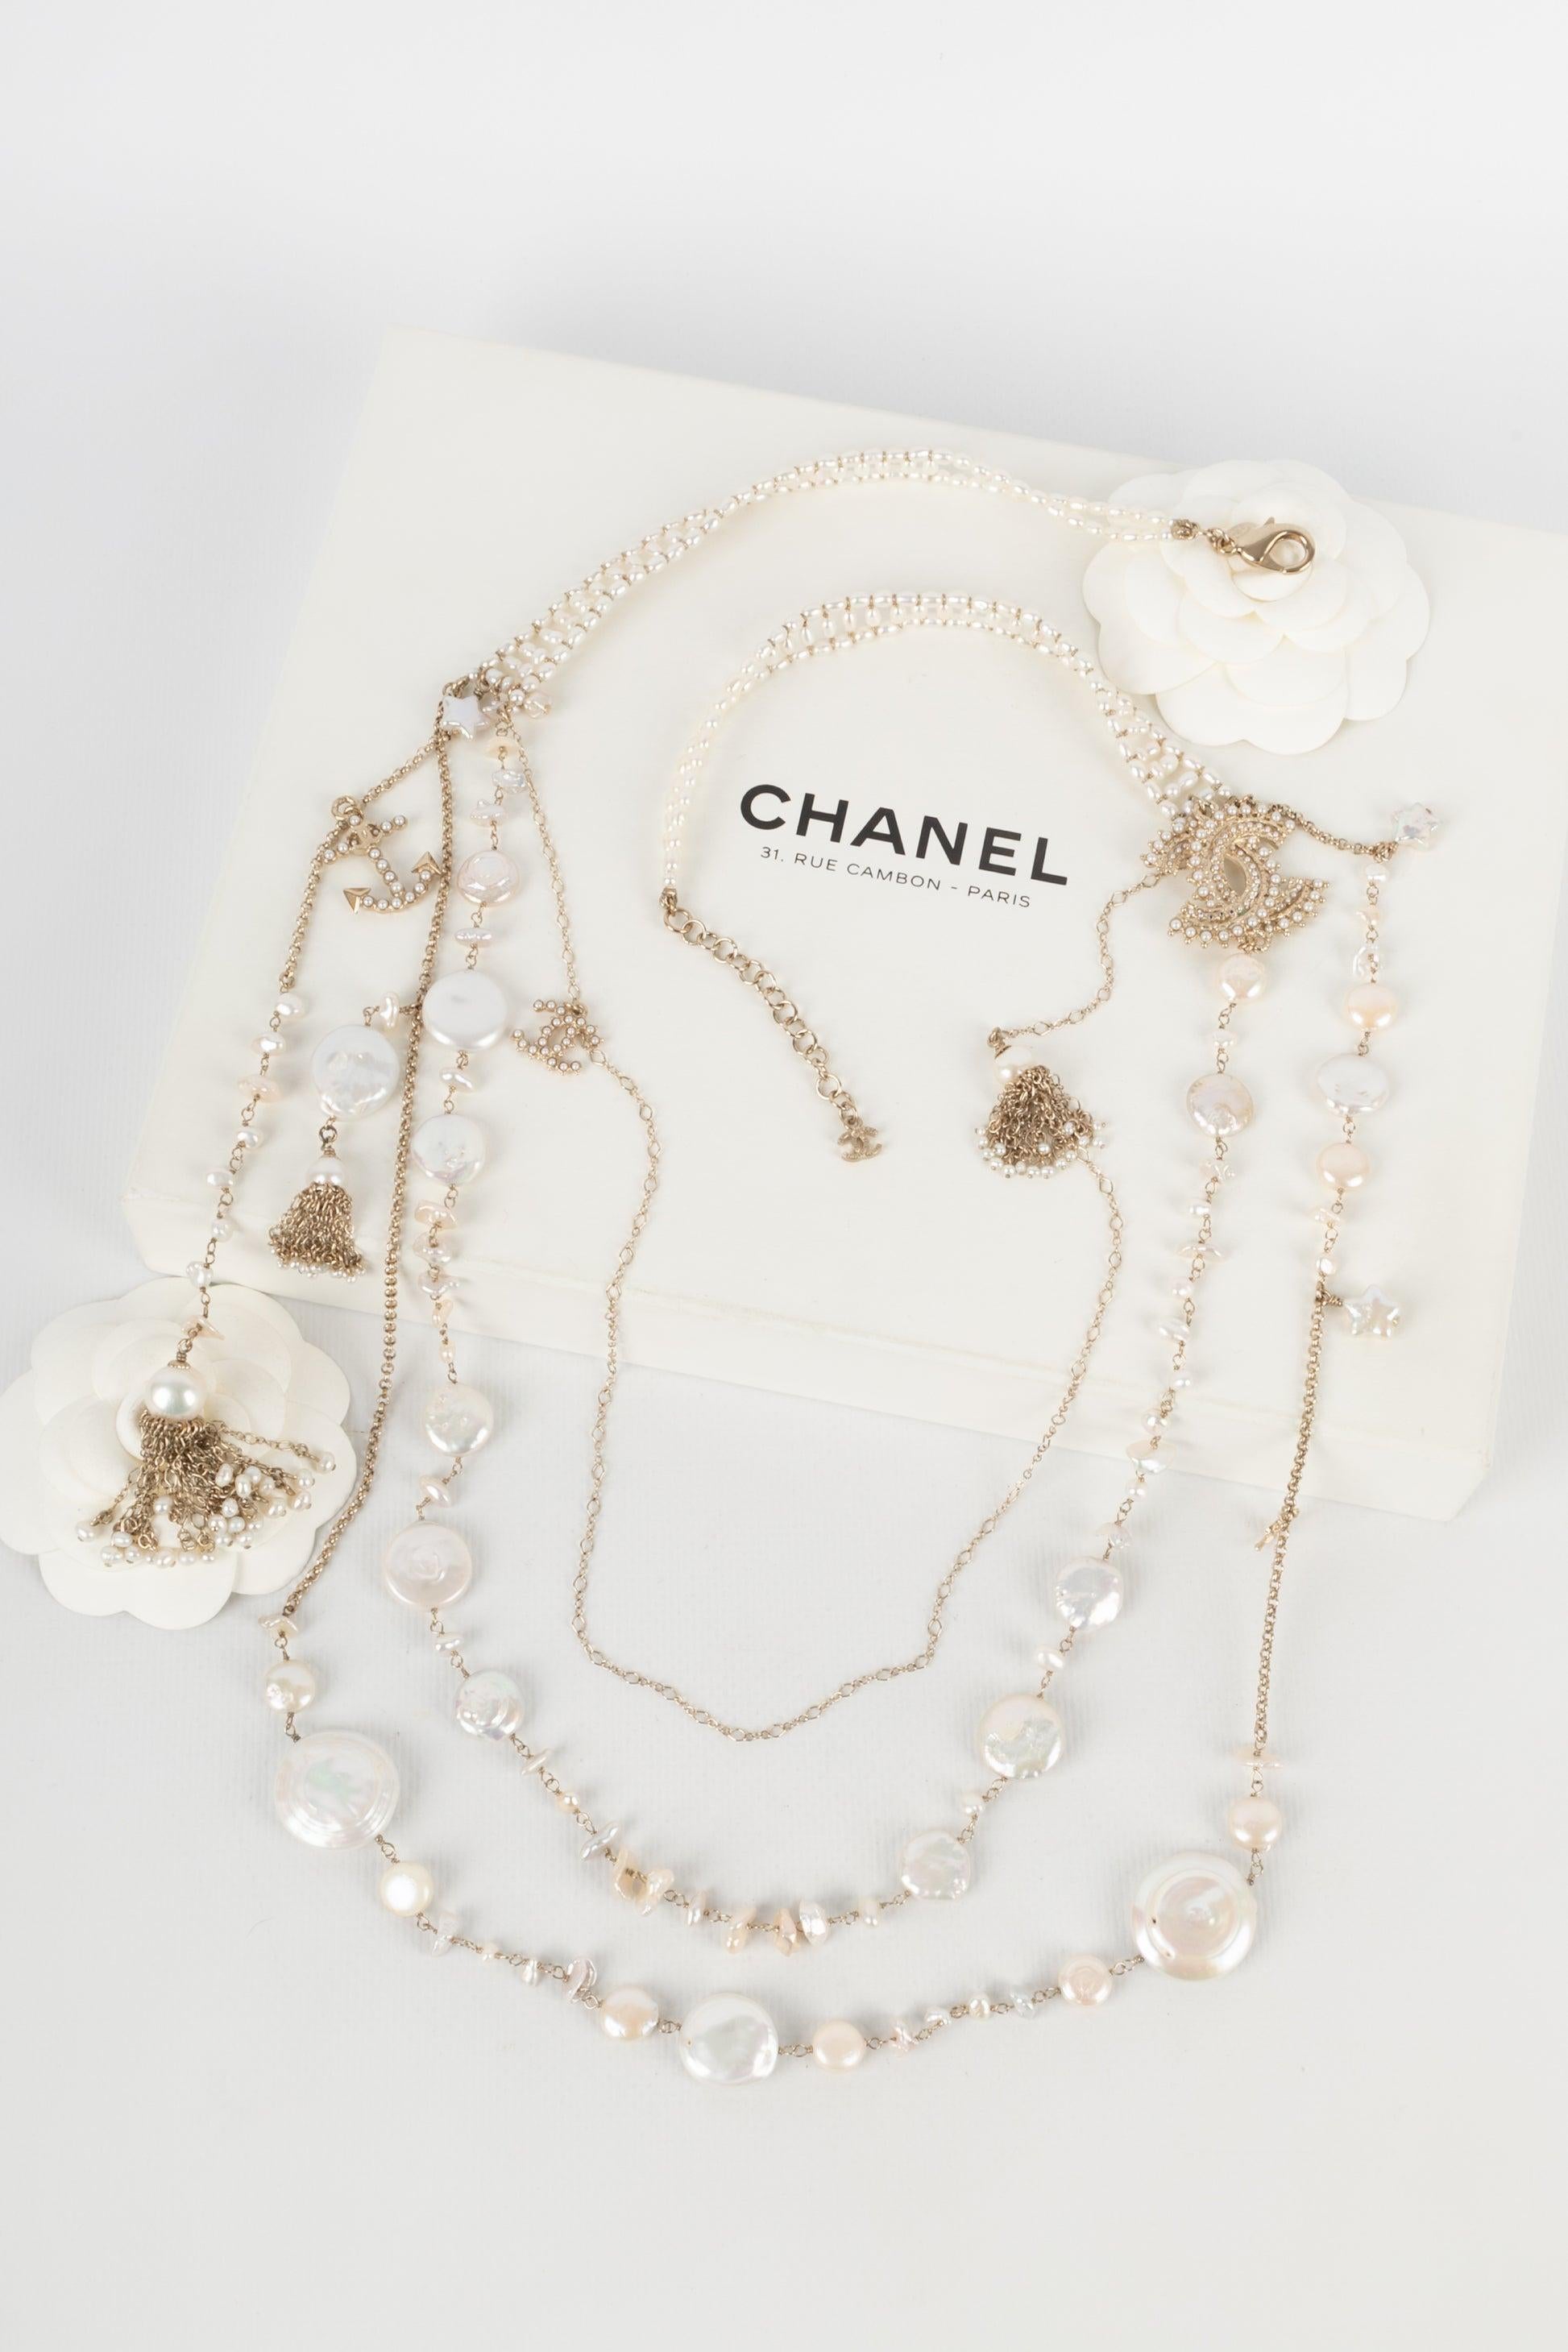 Chanel Golden Metal Necklace with Costume Pearls, 2018 7